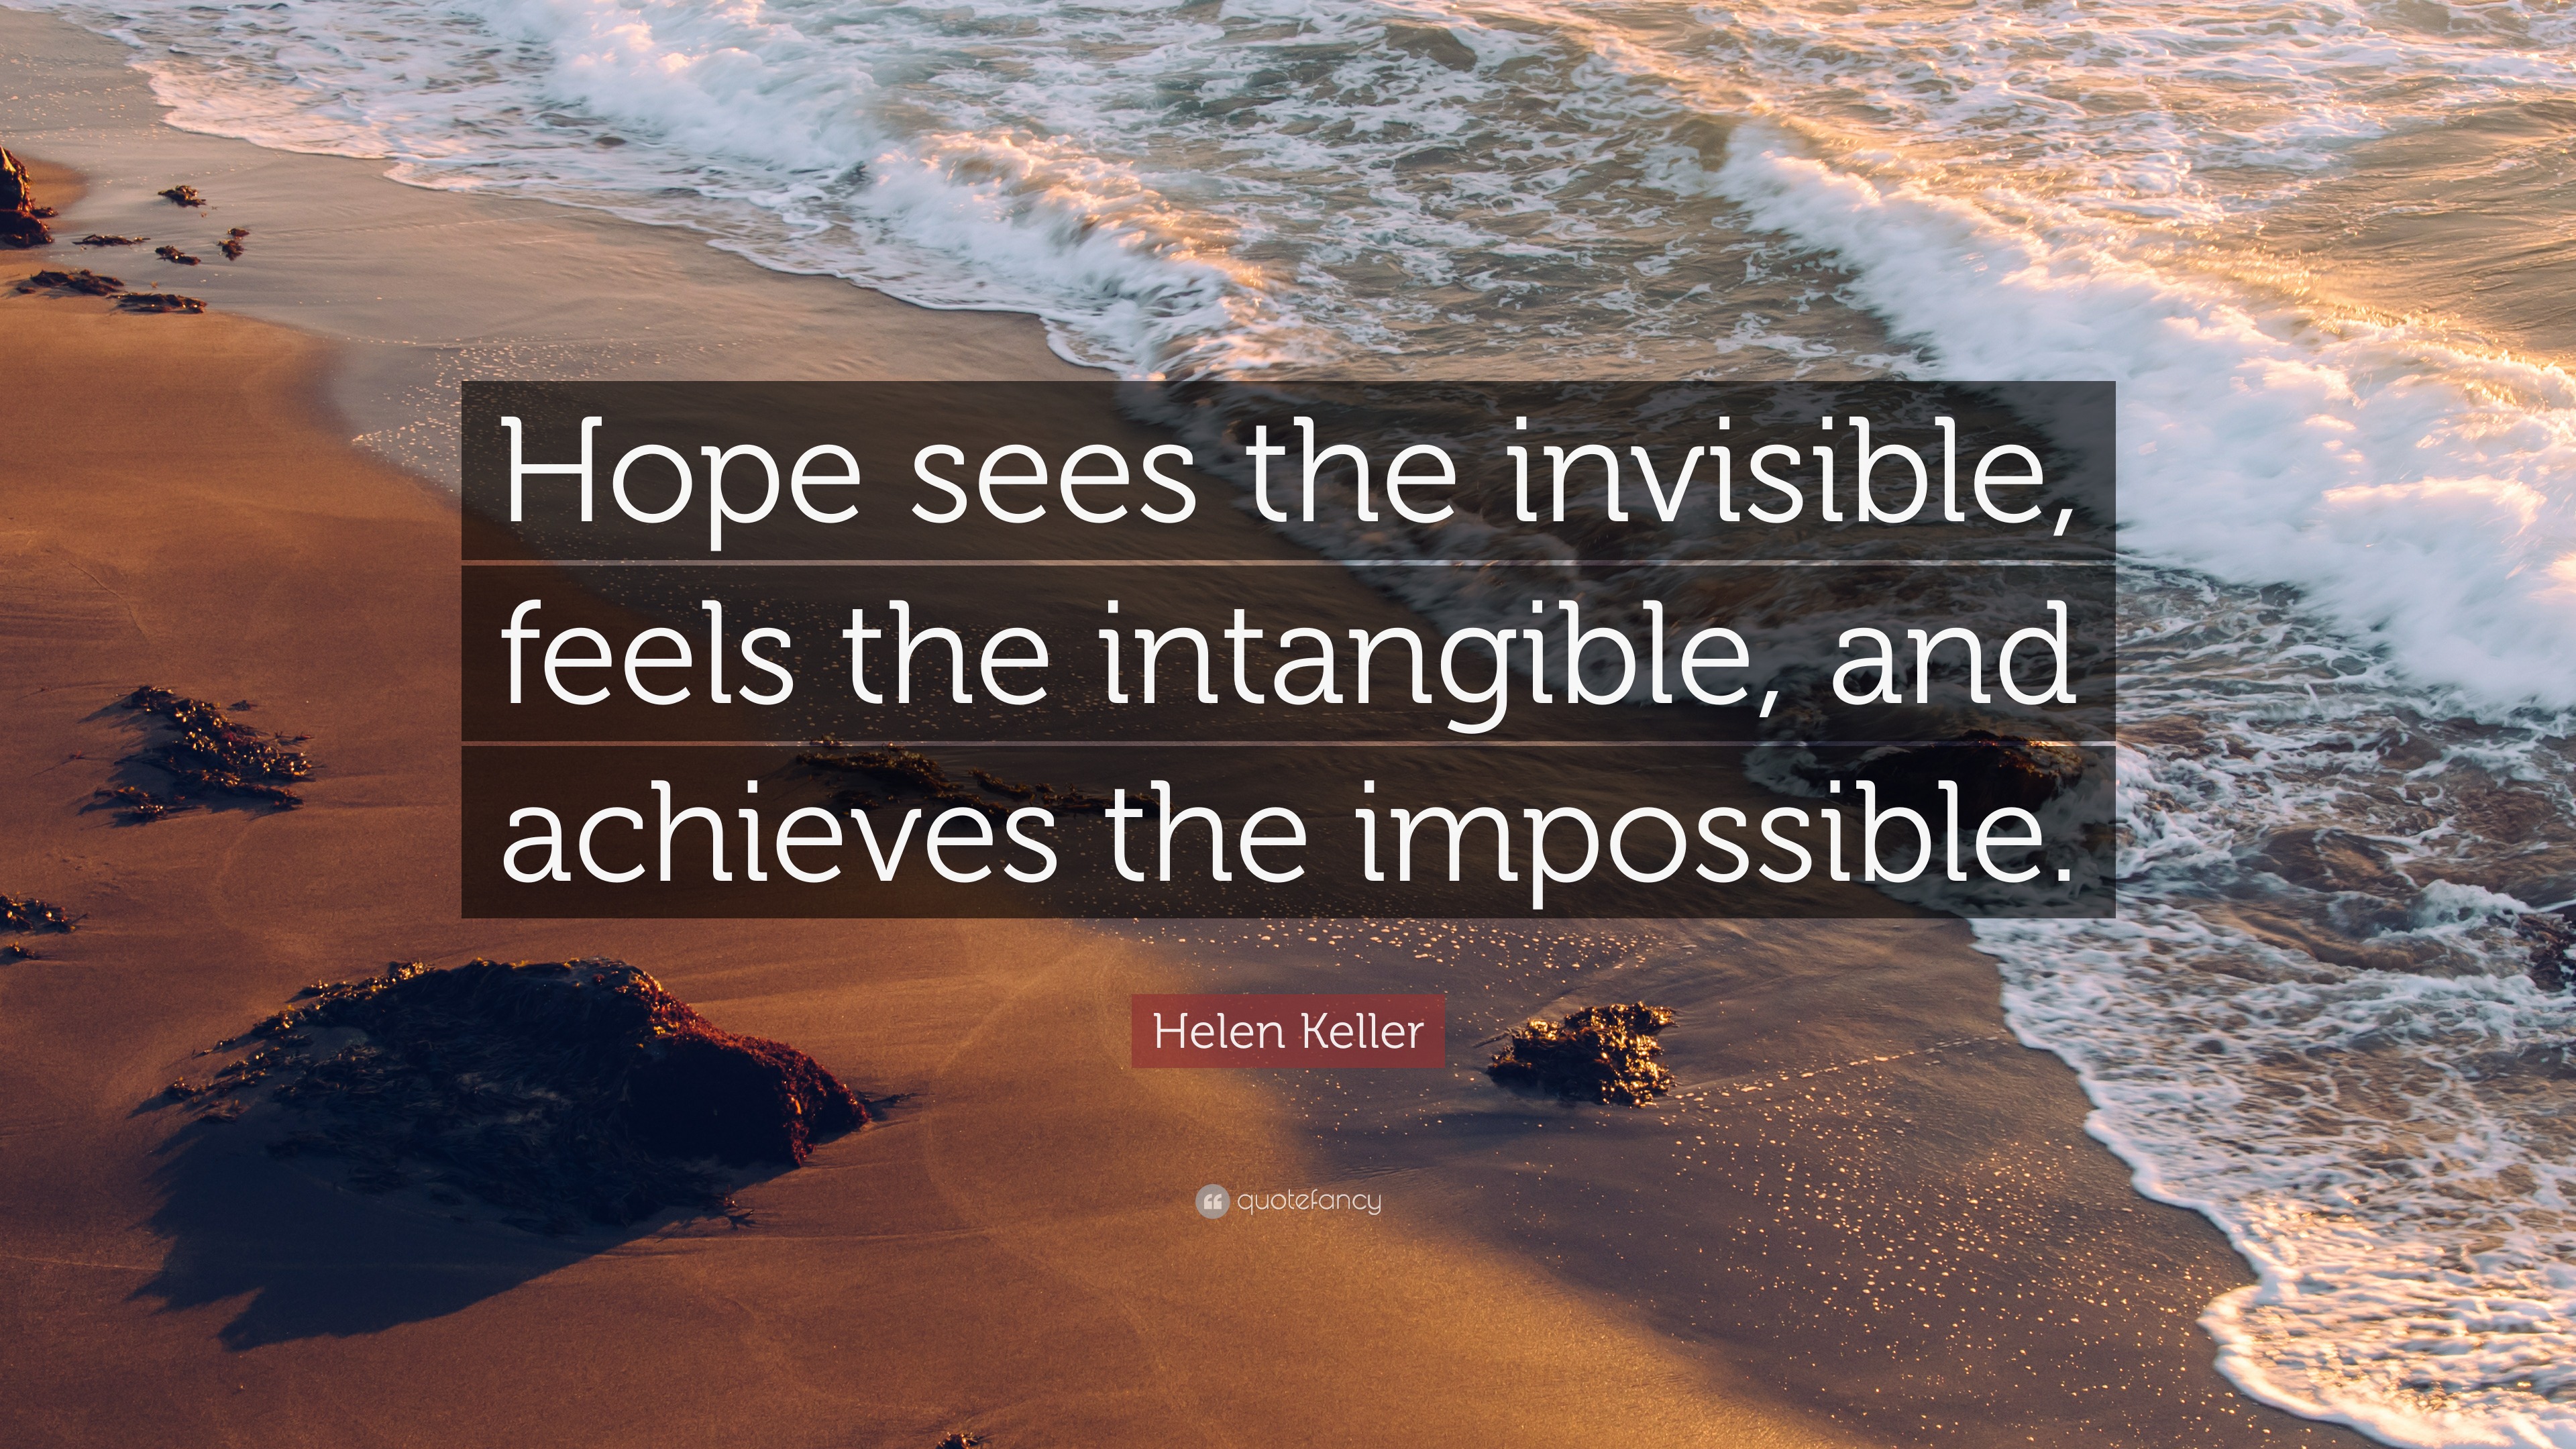 Helen Keller Quote: “Hope sees the invisible, feels the intangible, and